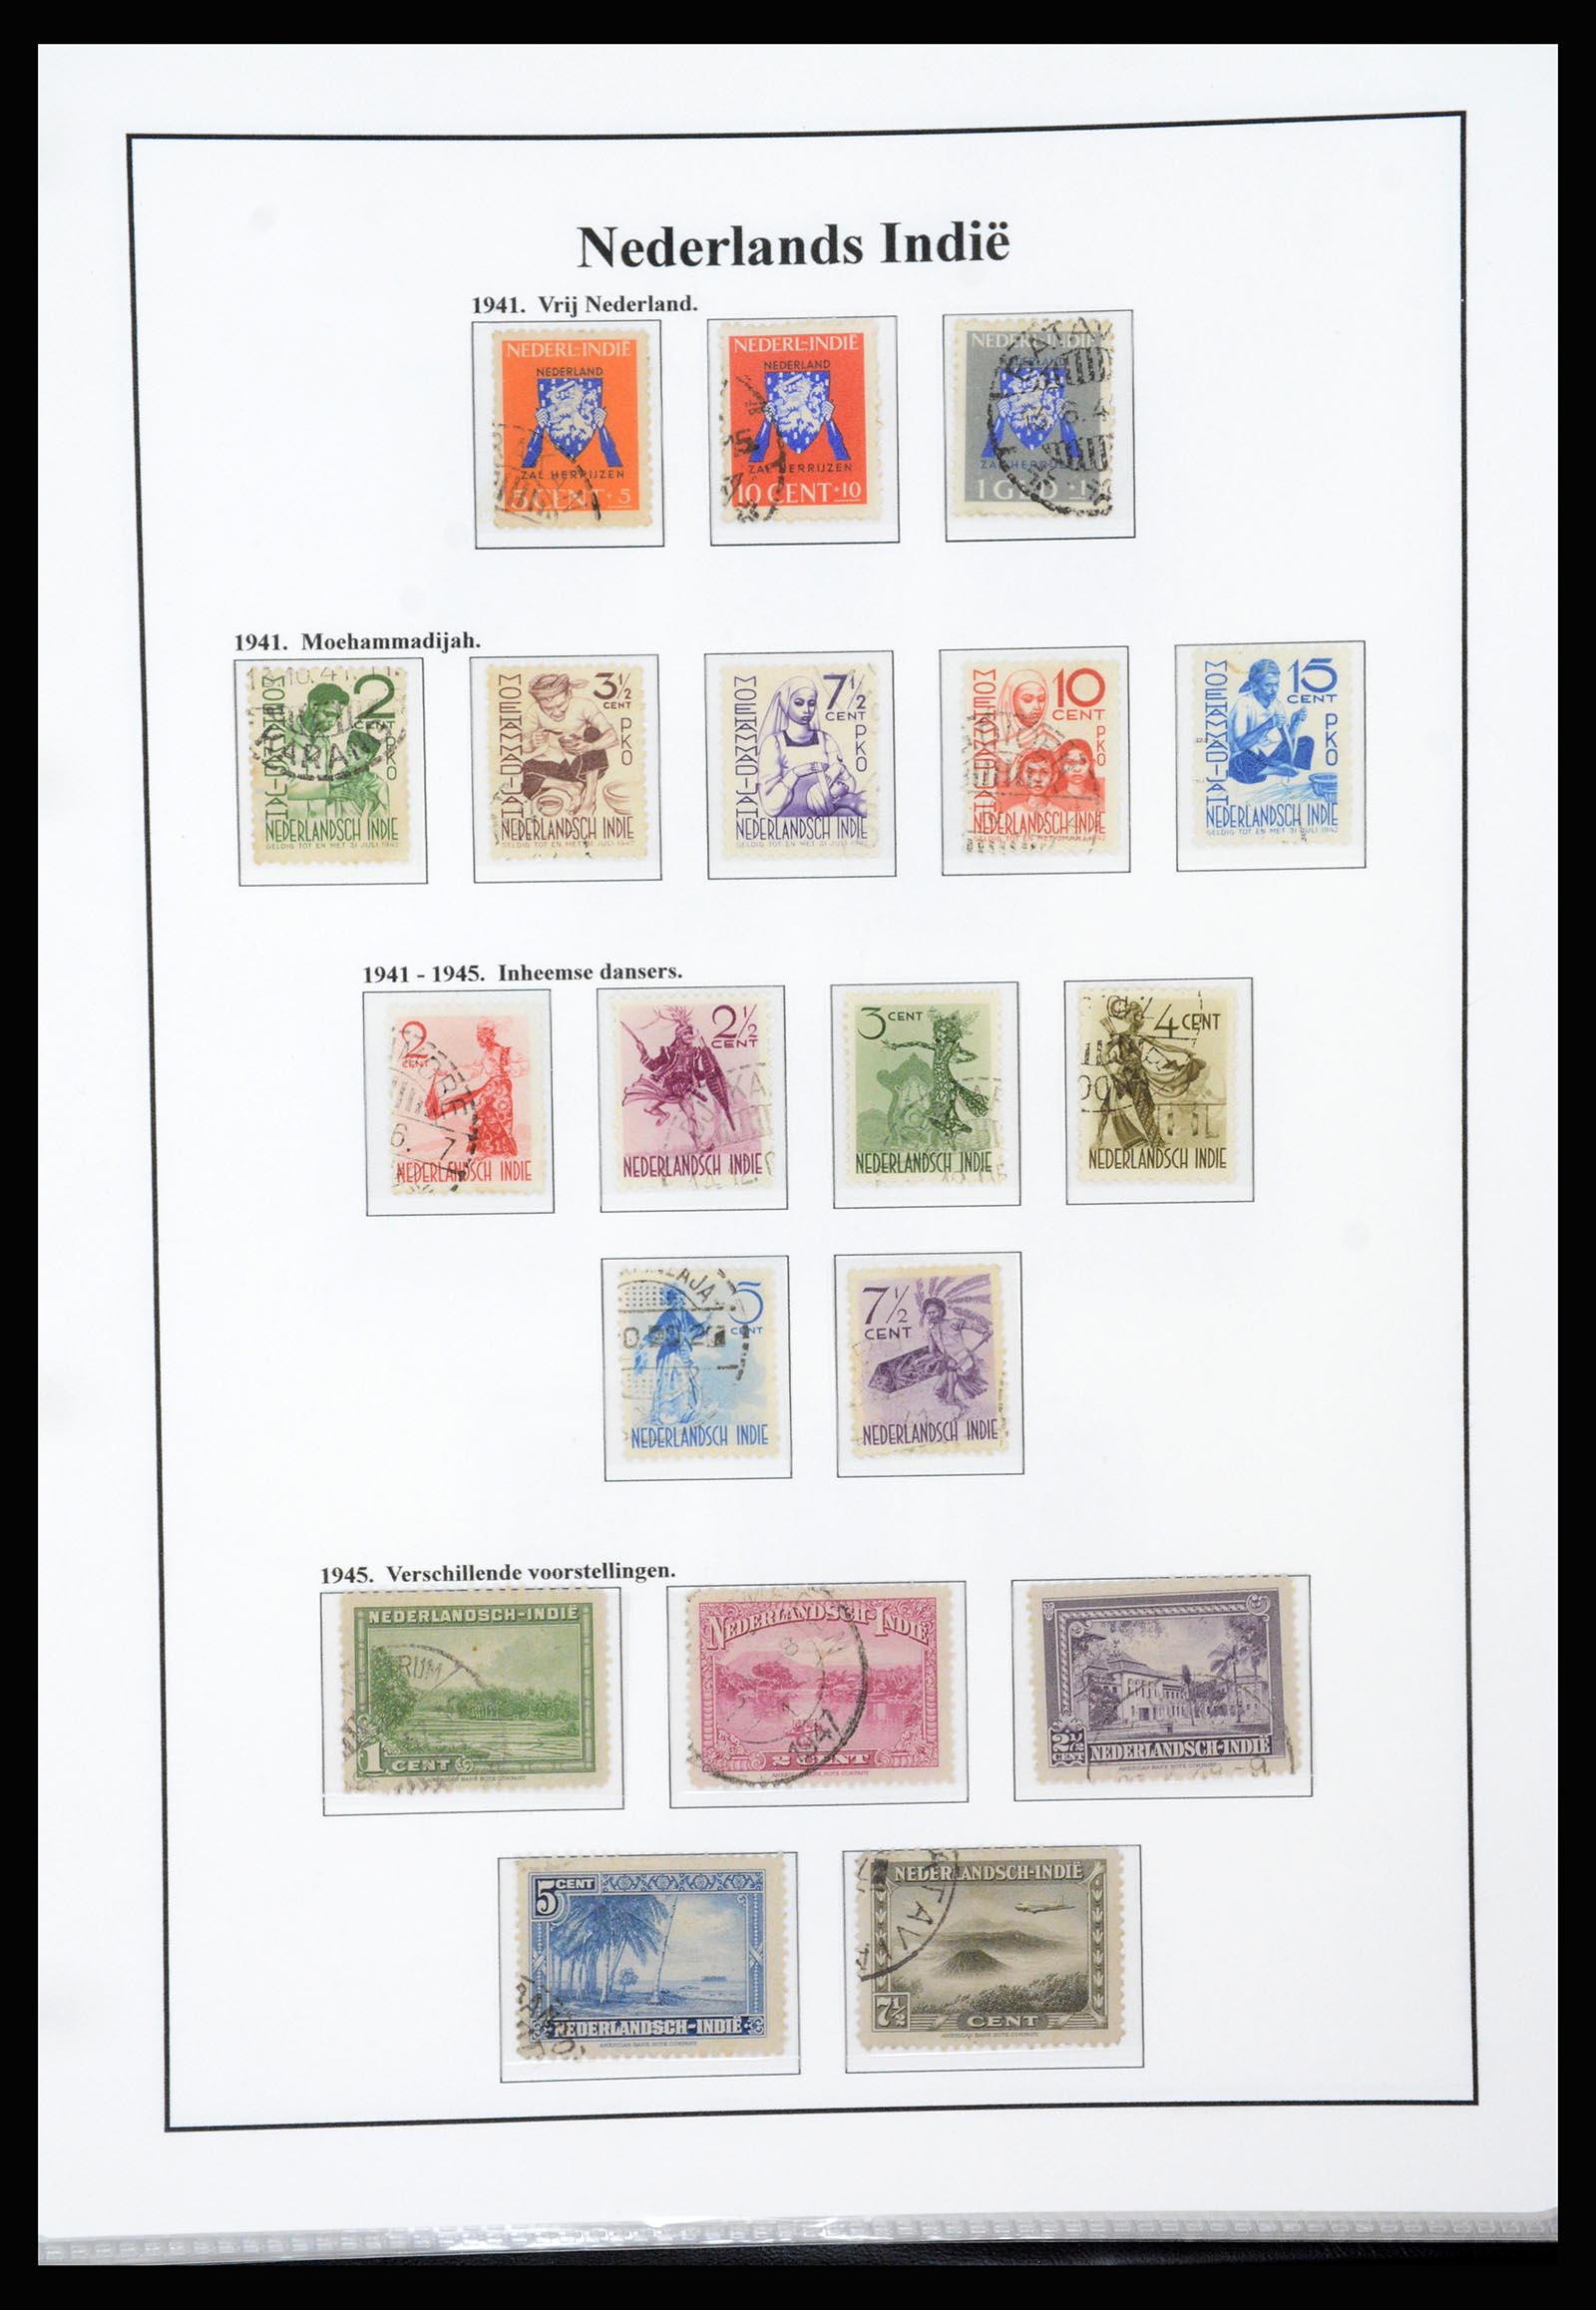 37247 024 - Stamp collection 37247 Dutch east Indies 1864-1949.